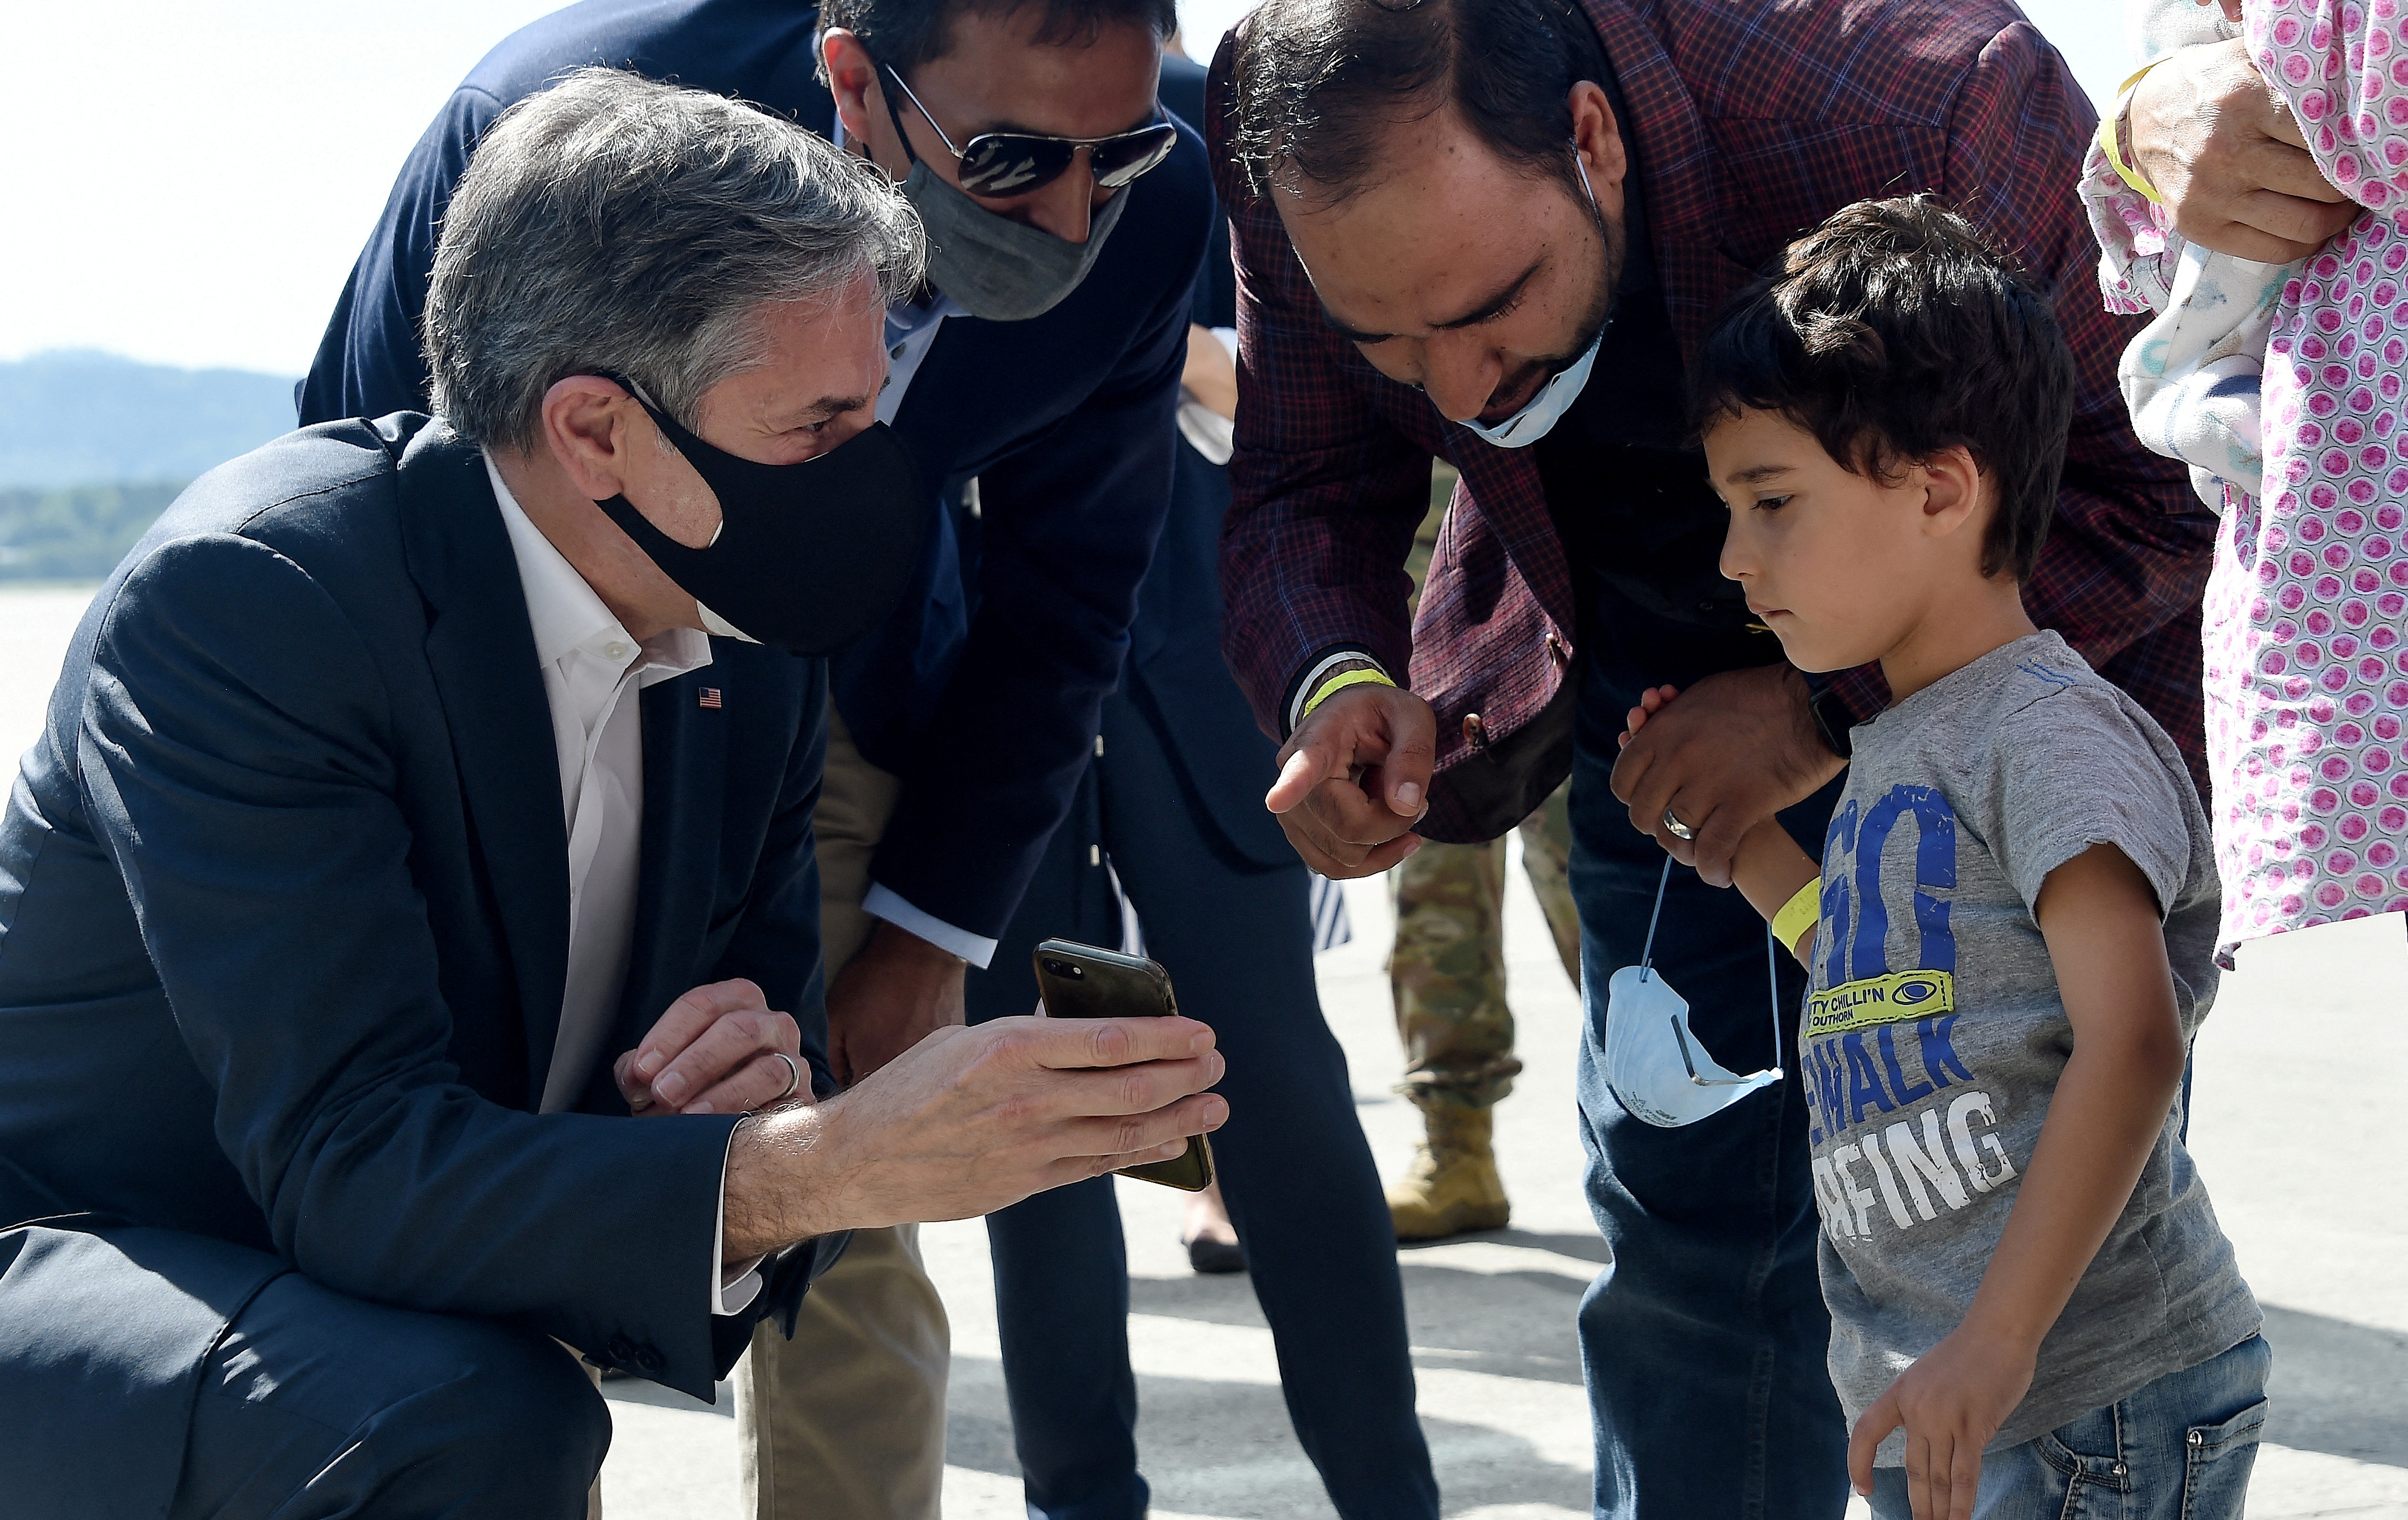 U.S Secretary of State Antony Blinken meets with an Afghan refugee family outside Hangar 5 for evacuation operations at Ramstein Air Base in Germany